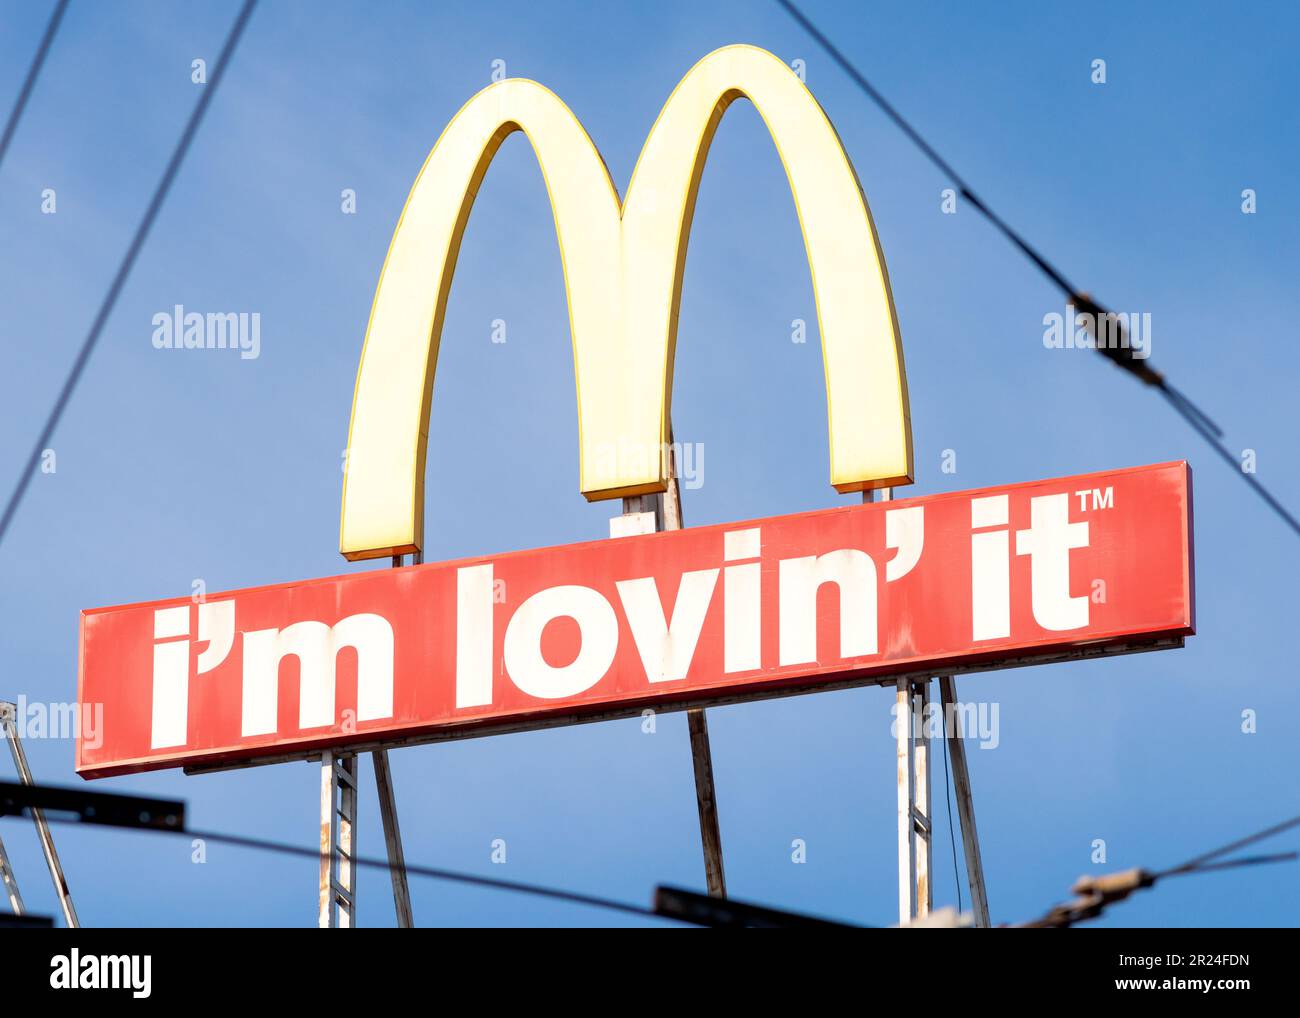 McDonald's logo sign and I'm Lovin' It slogan unusual view as seen through overhead lines or streetcar wires in urban environment Stock Photo